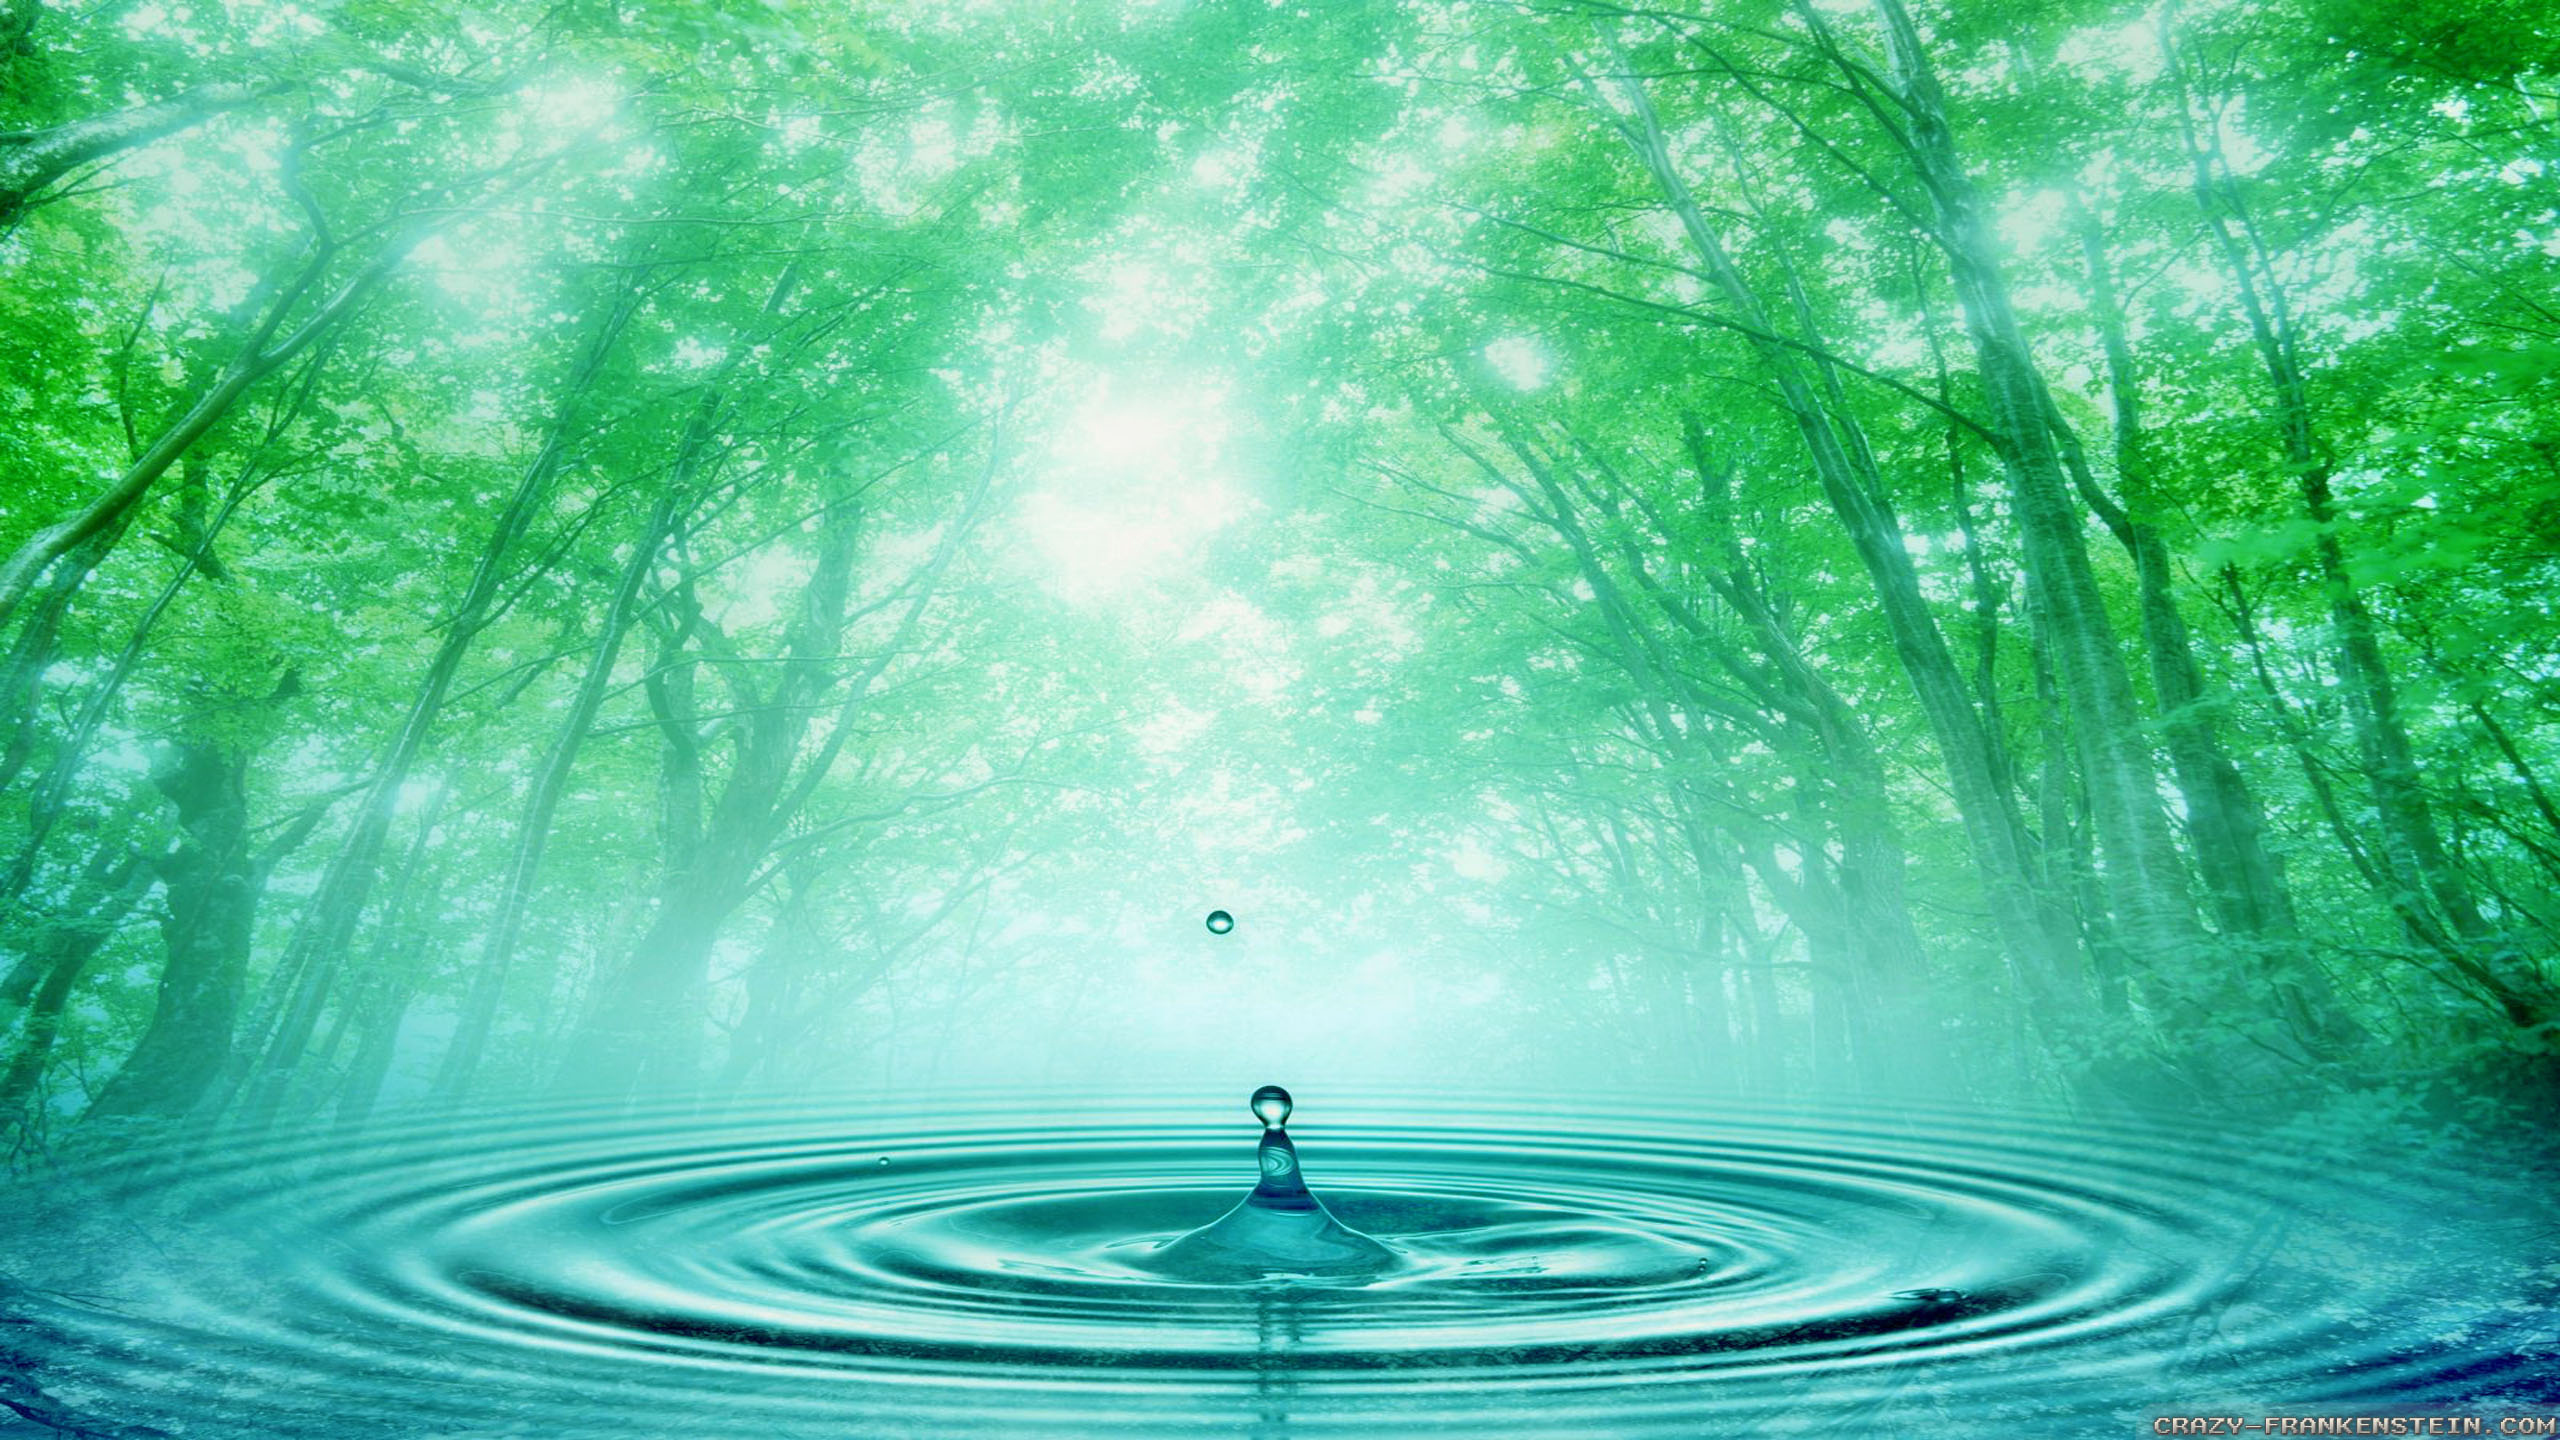 Water Wallpaper High Quality 100 Quality HD Images